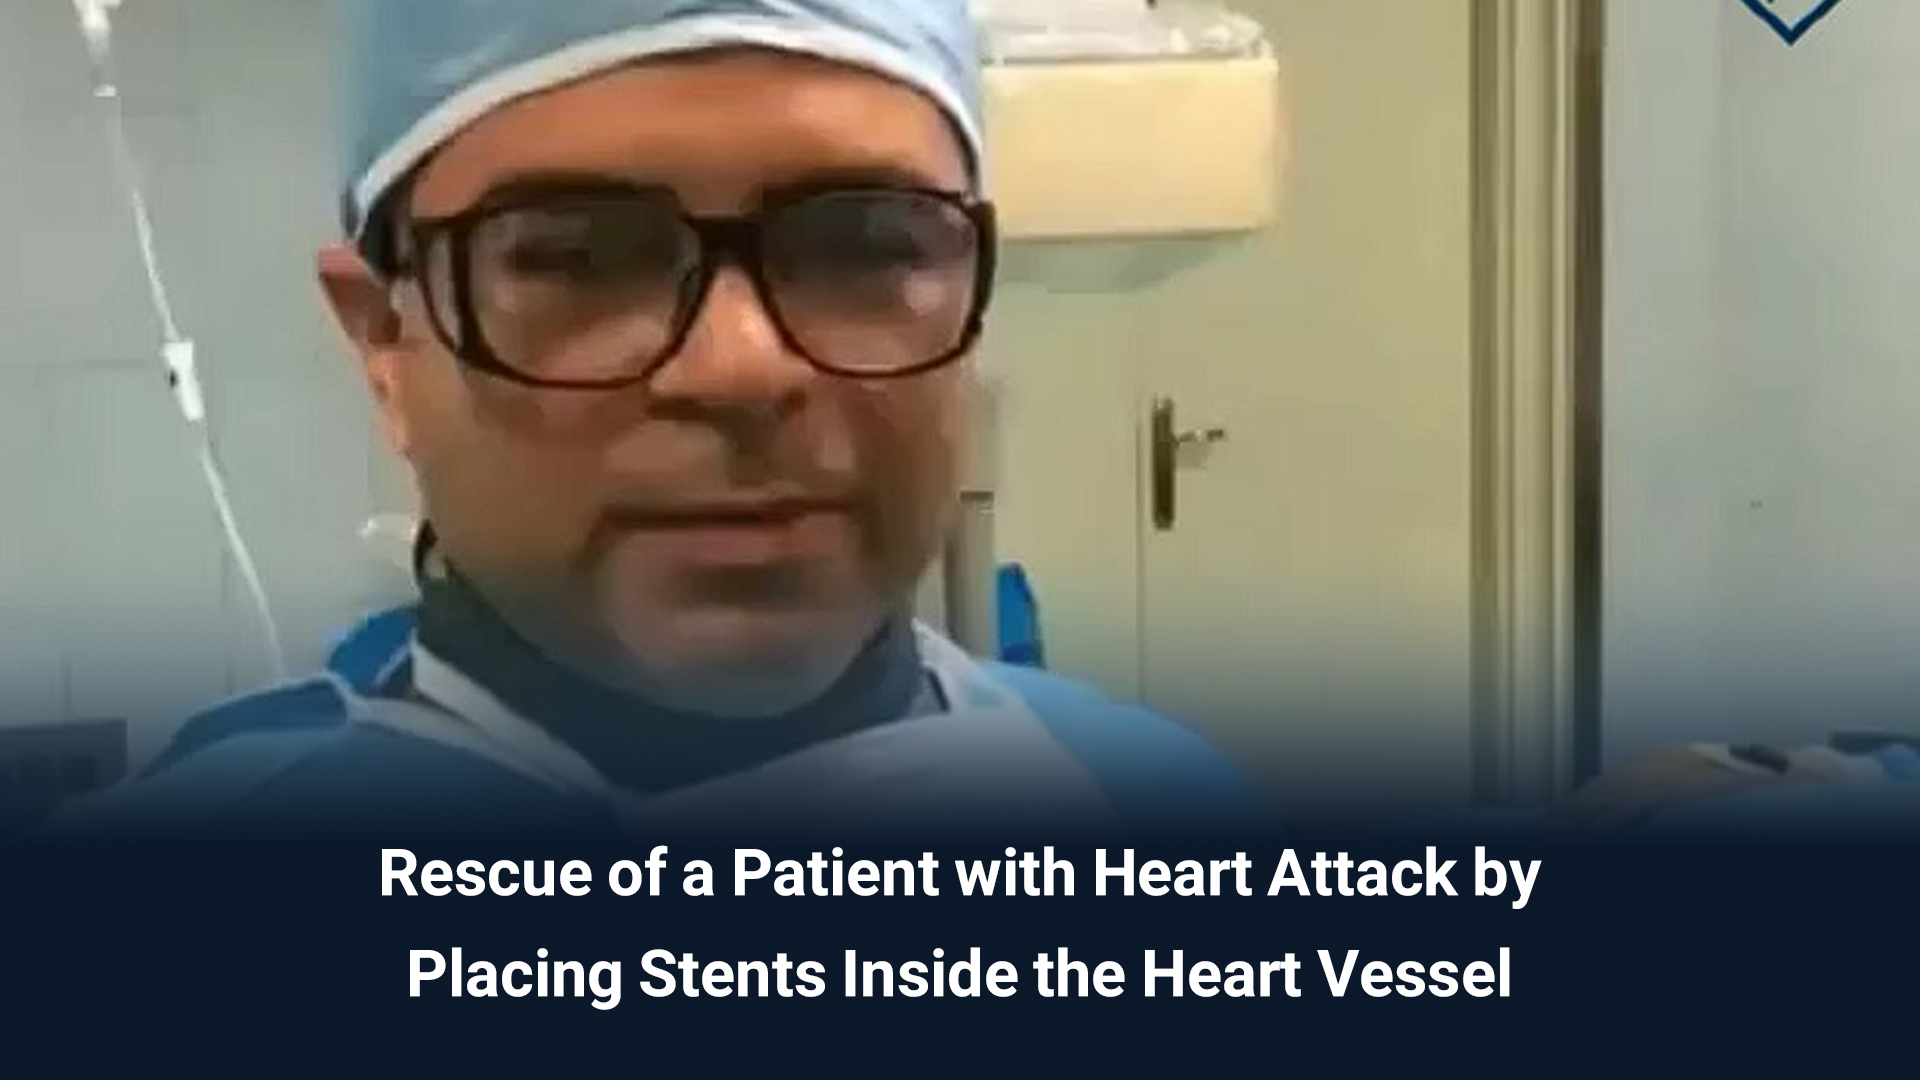 Rescue of a Patient with Heart Attack by Placing Stents Inside the Heart Vessel